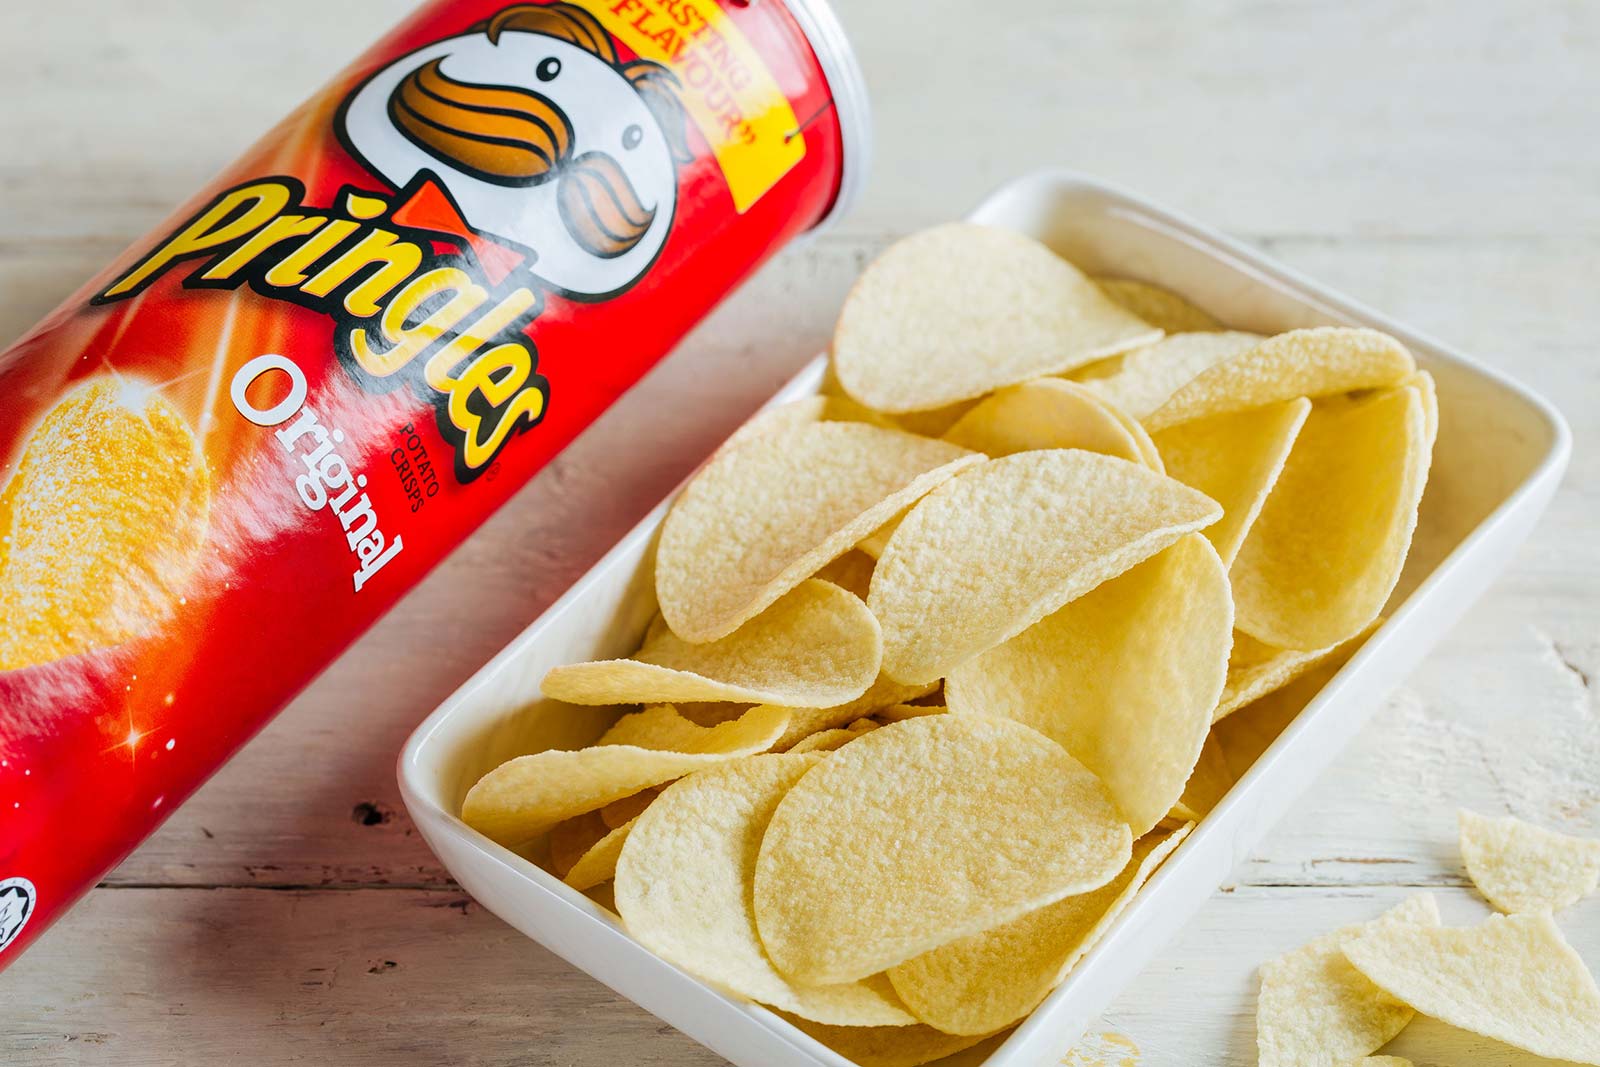 🥬 Only a True Vegan Can Tell If These Snacks Are Actually Vegan or Not Pringles Original Potato Chips